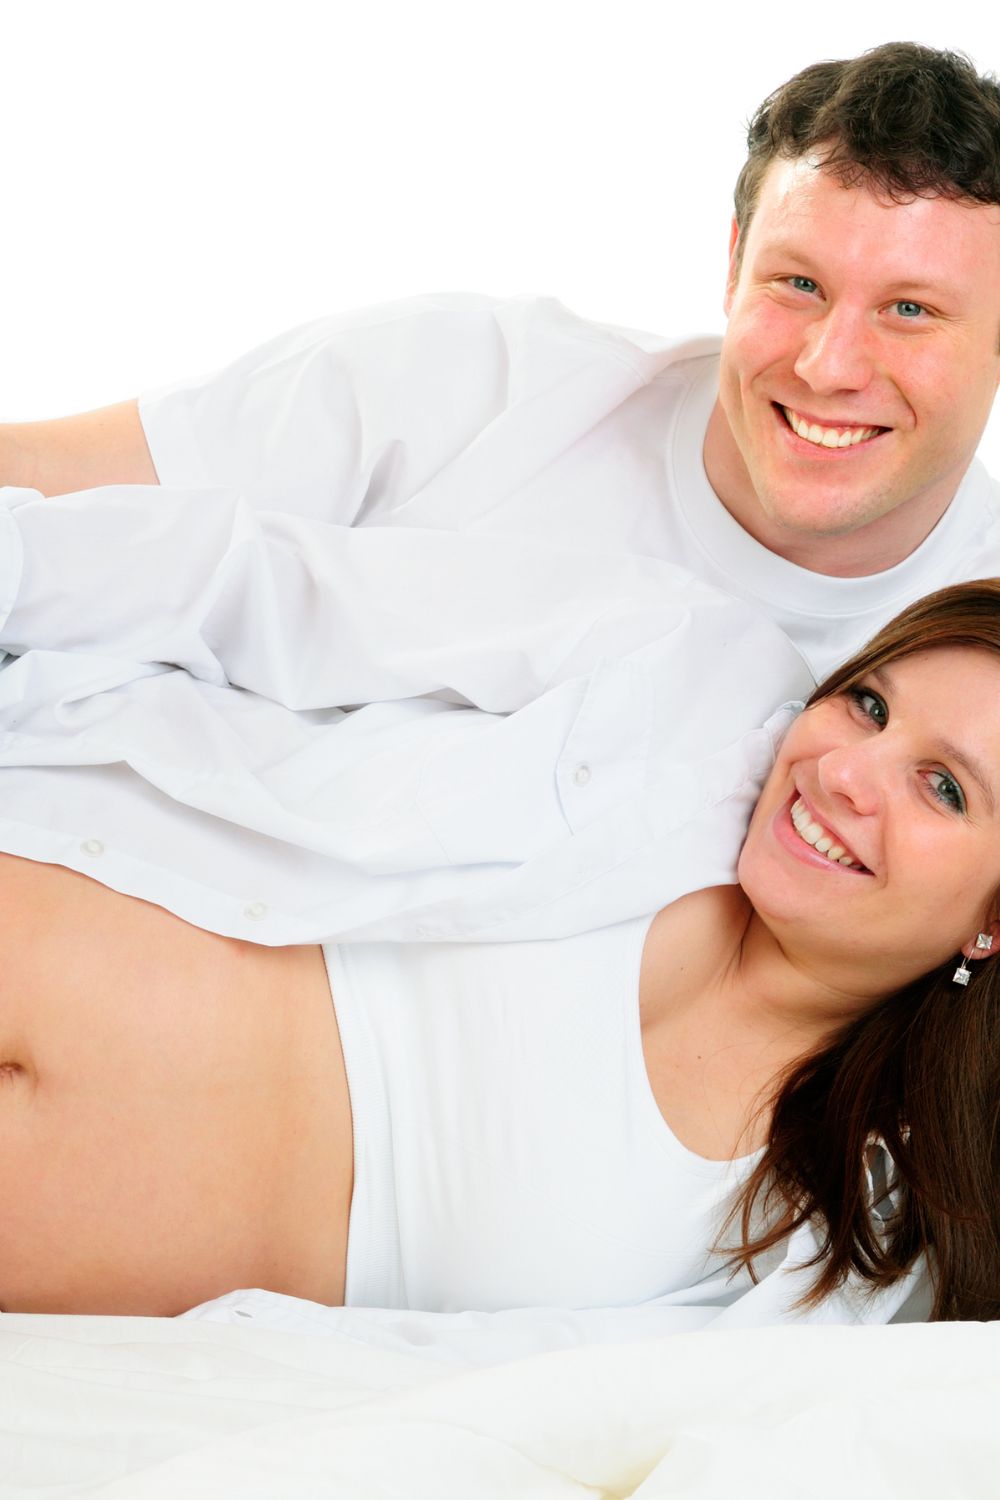 9 Things Husbands should not do during pregnancy